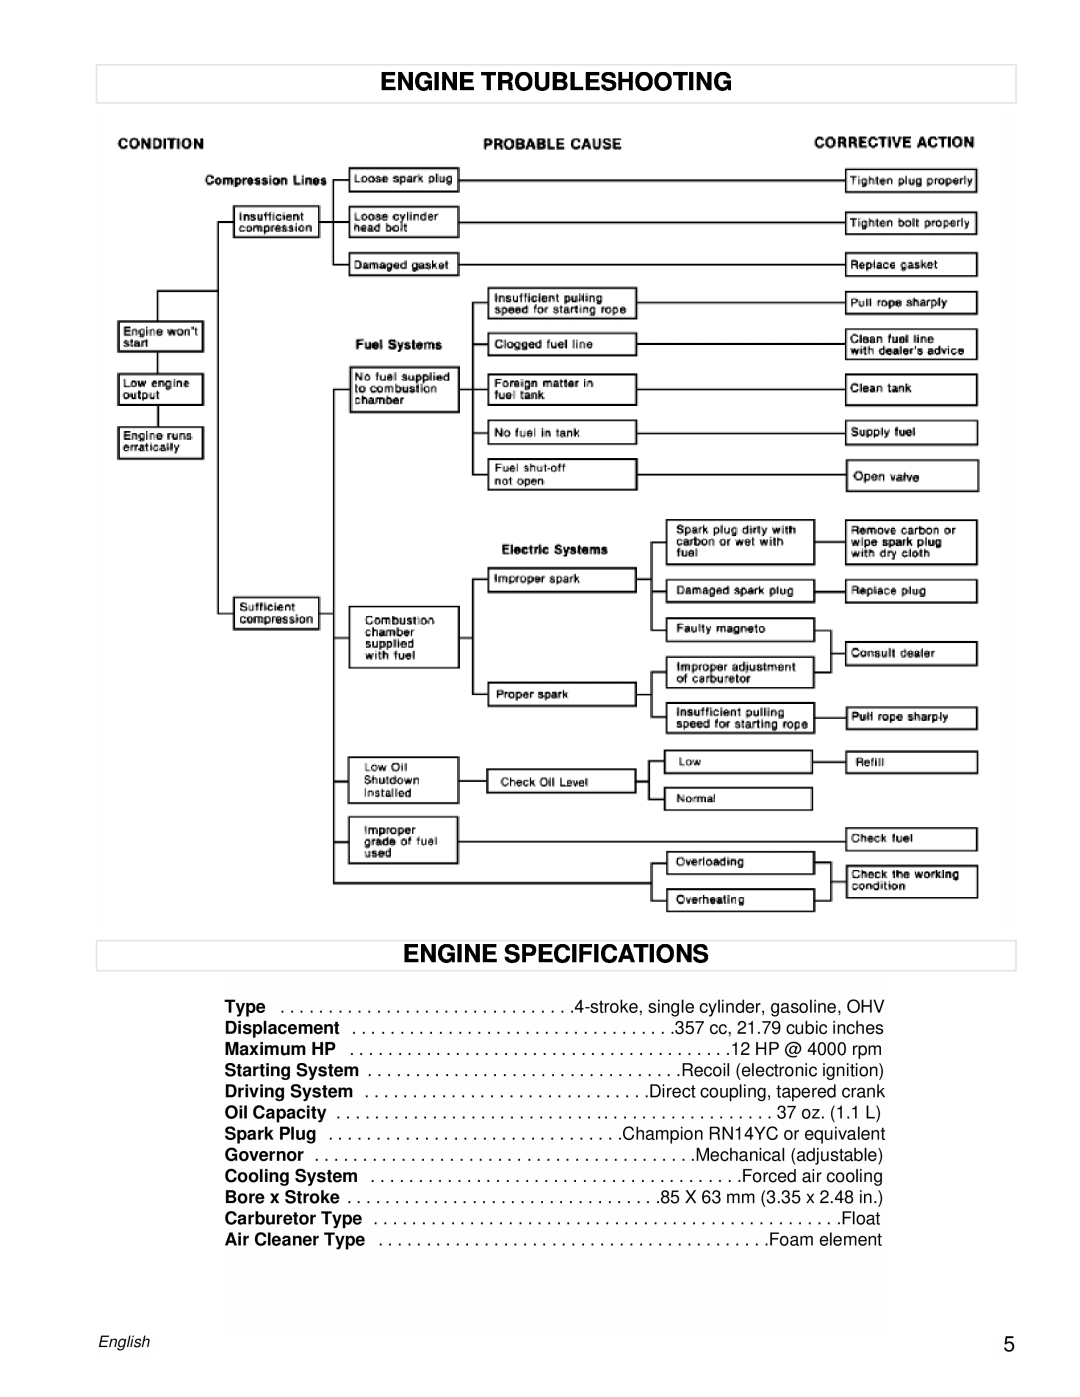 Powermate PM0106001 manual Engine Troubleshooting Engine Specifications, English 